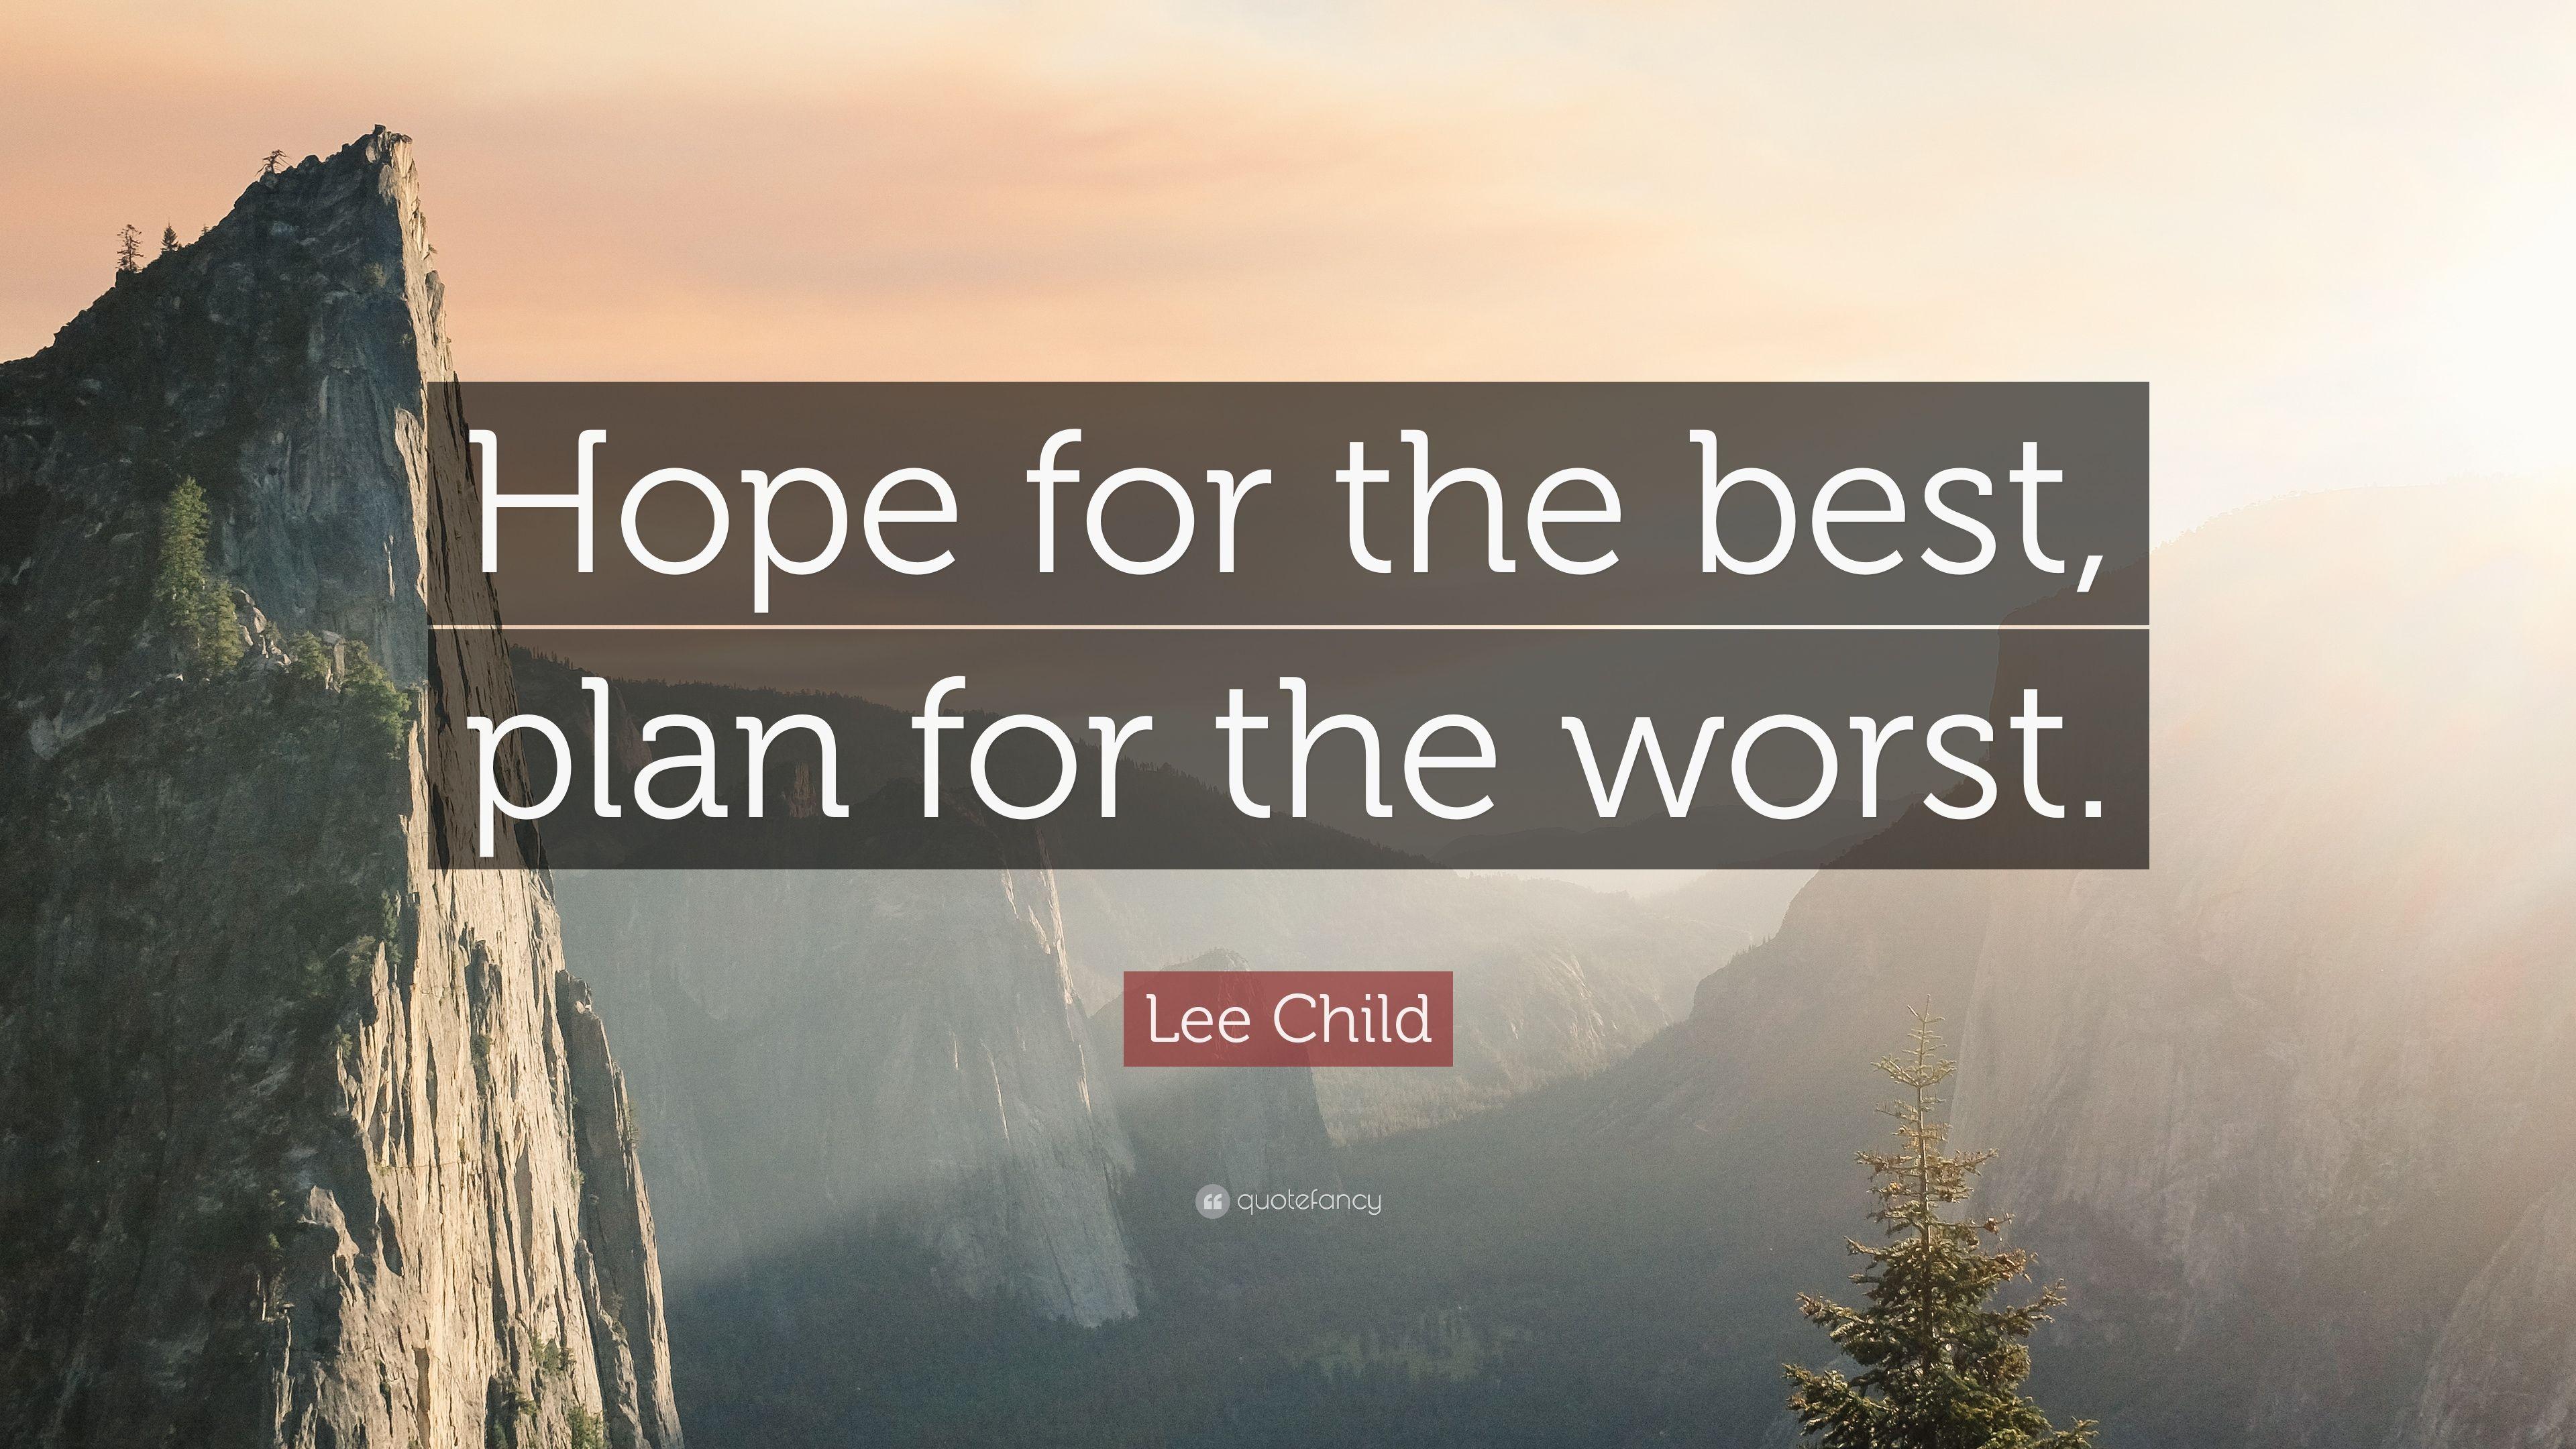 Lee Child Quote: “Hope for the best, plan for the worst.” 12